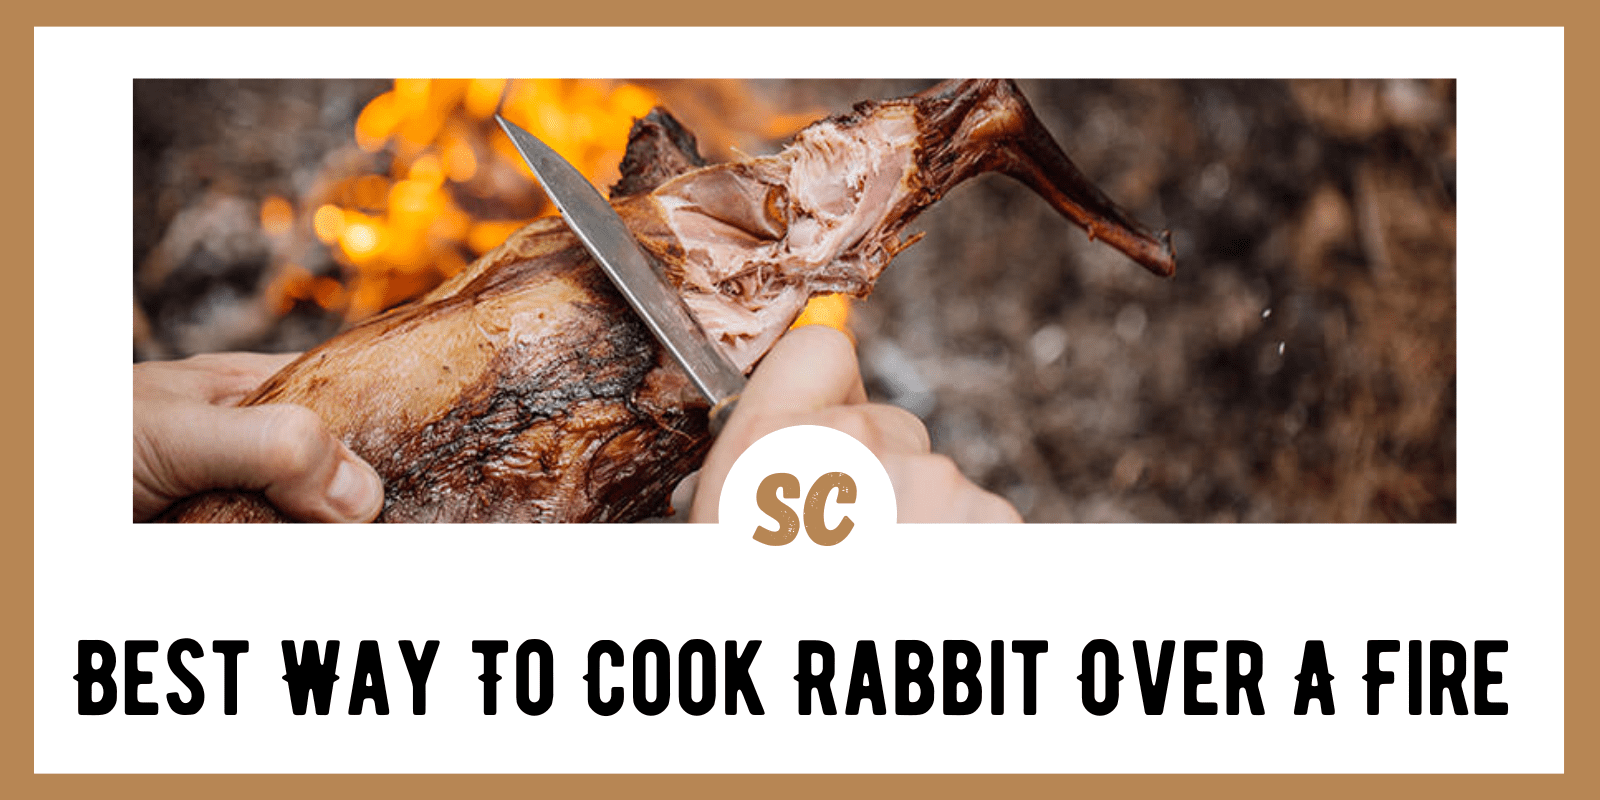 Best Way To Cook Rabbit Over A Fire